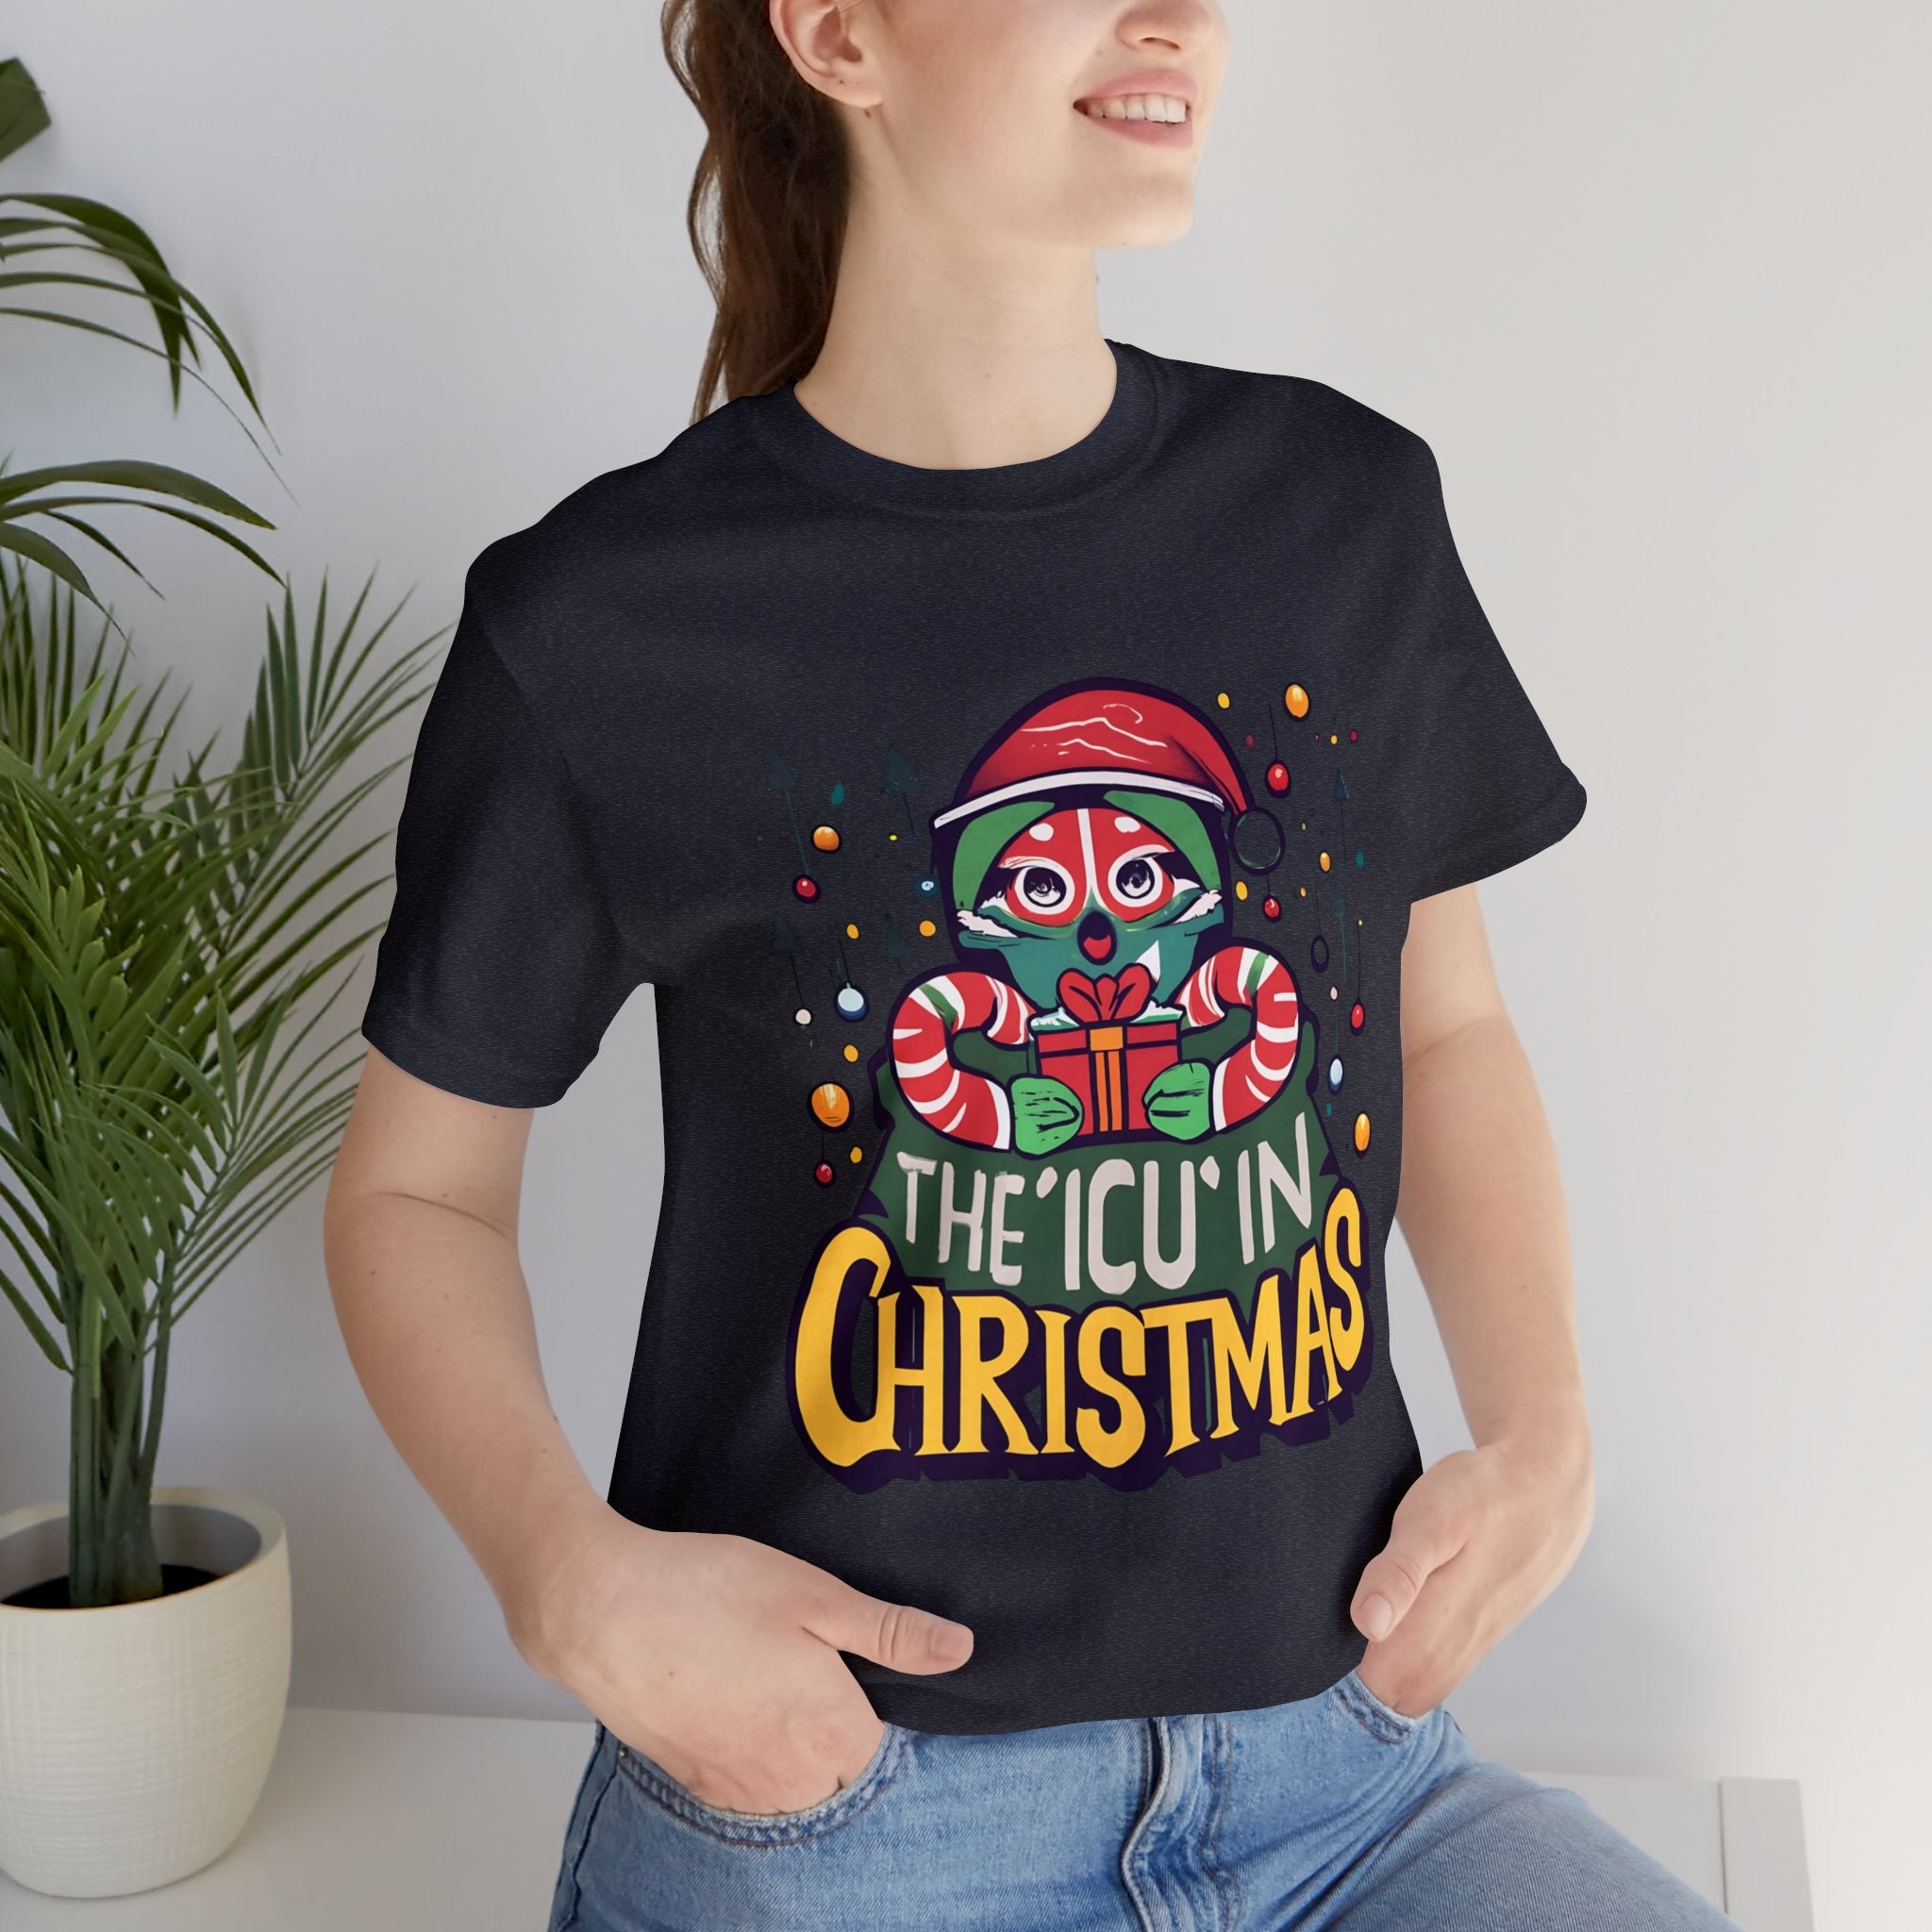 The ICU in Christmas Holiday Shirt For Nurses Or Doctors that Work in The ICU